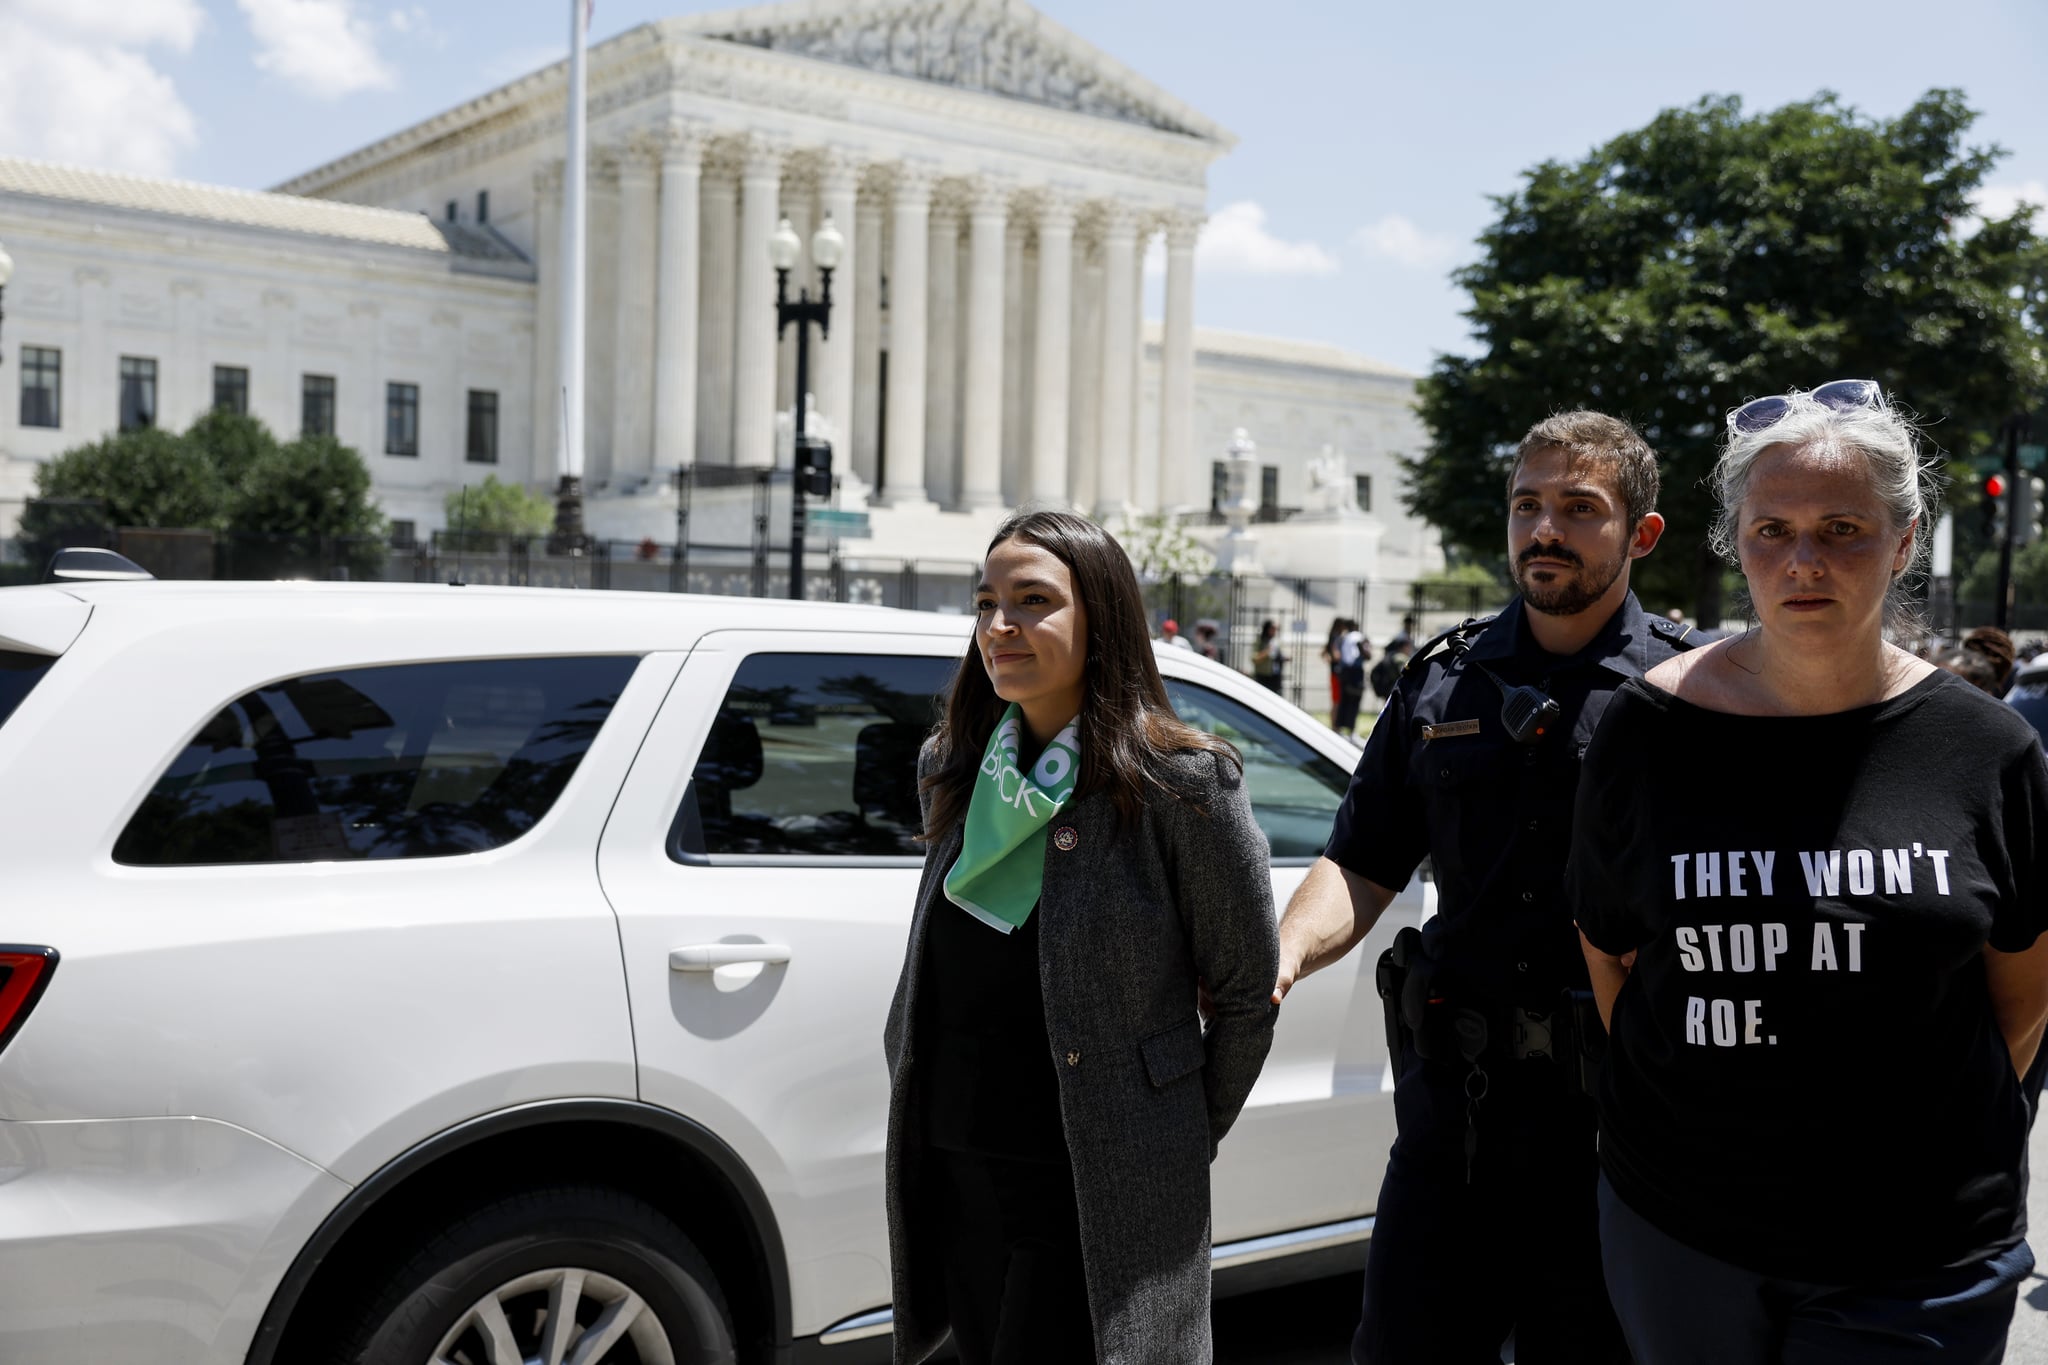 WASHINGTON, DC - JULY 19: Rep. Alexandria Ocasio-Cortez (D-NY) is detained by U.S. Capitol Police Officers after participating in a sit in with activists from Center for Popular Democracy Action (CPDA) in front of the U.S. Supreme Court Building on July 19, 2022 in Washington, DC. The CPDA held the protest with House Democrats in support of abortion rights. (Photo by Anna Moneymaker/Getty Images)